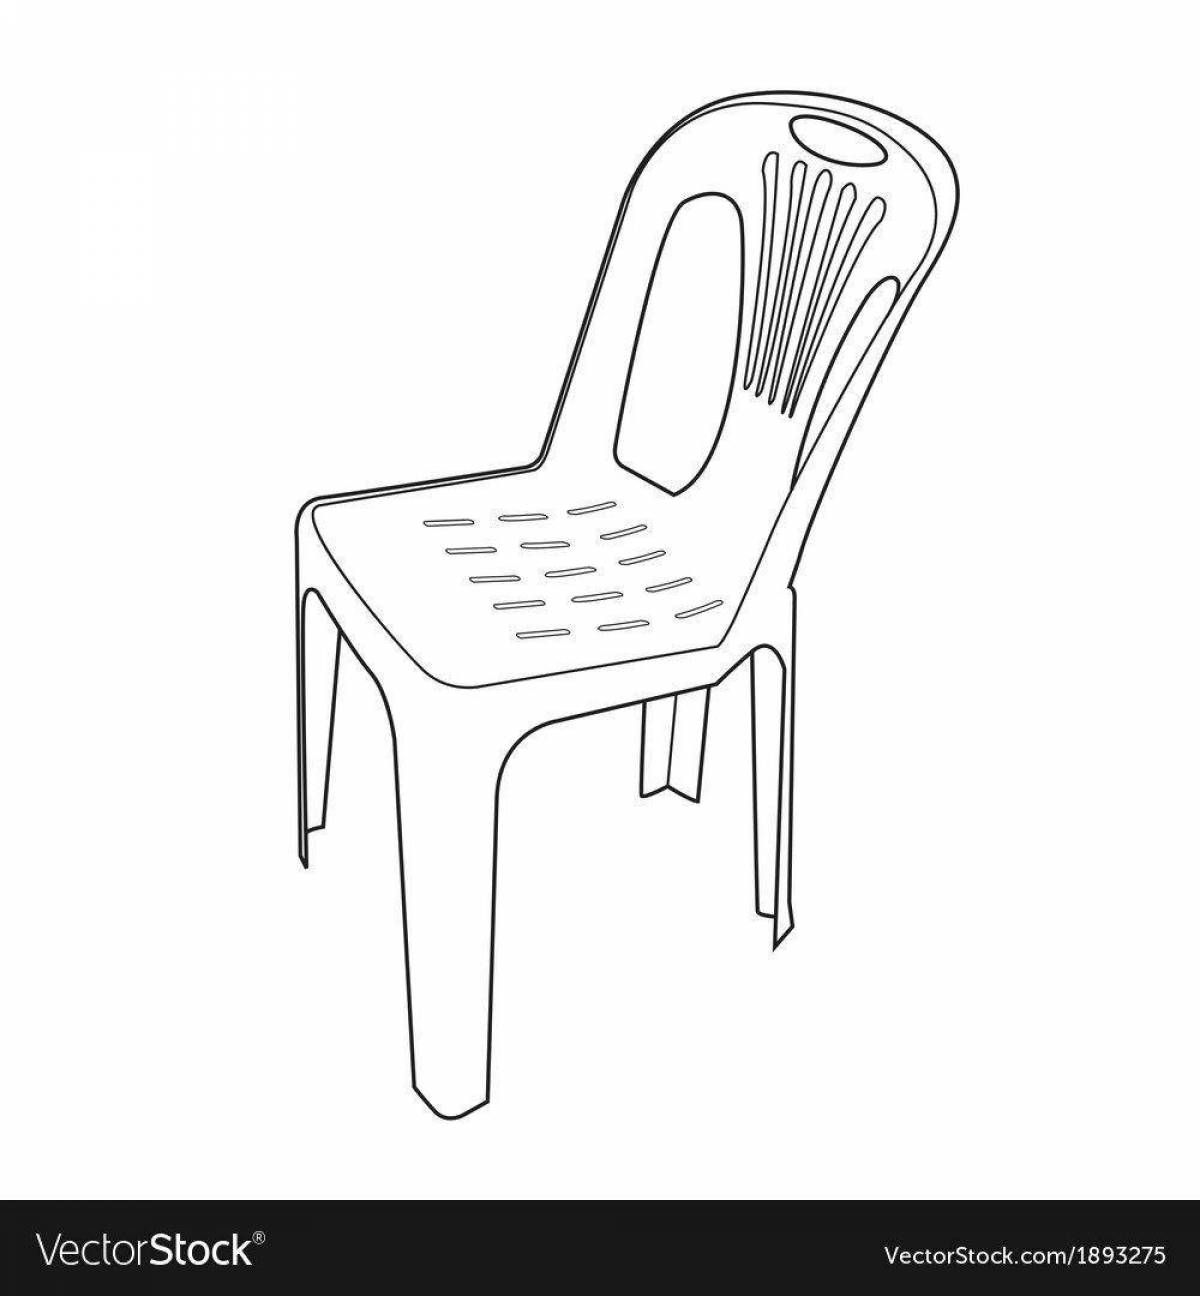 Fun coloring for baby chair